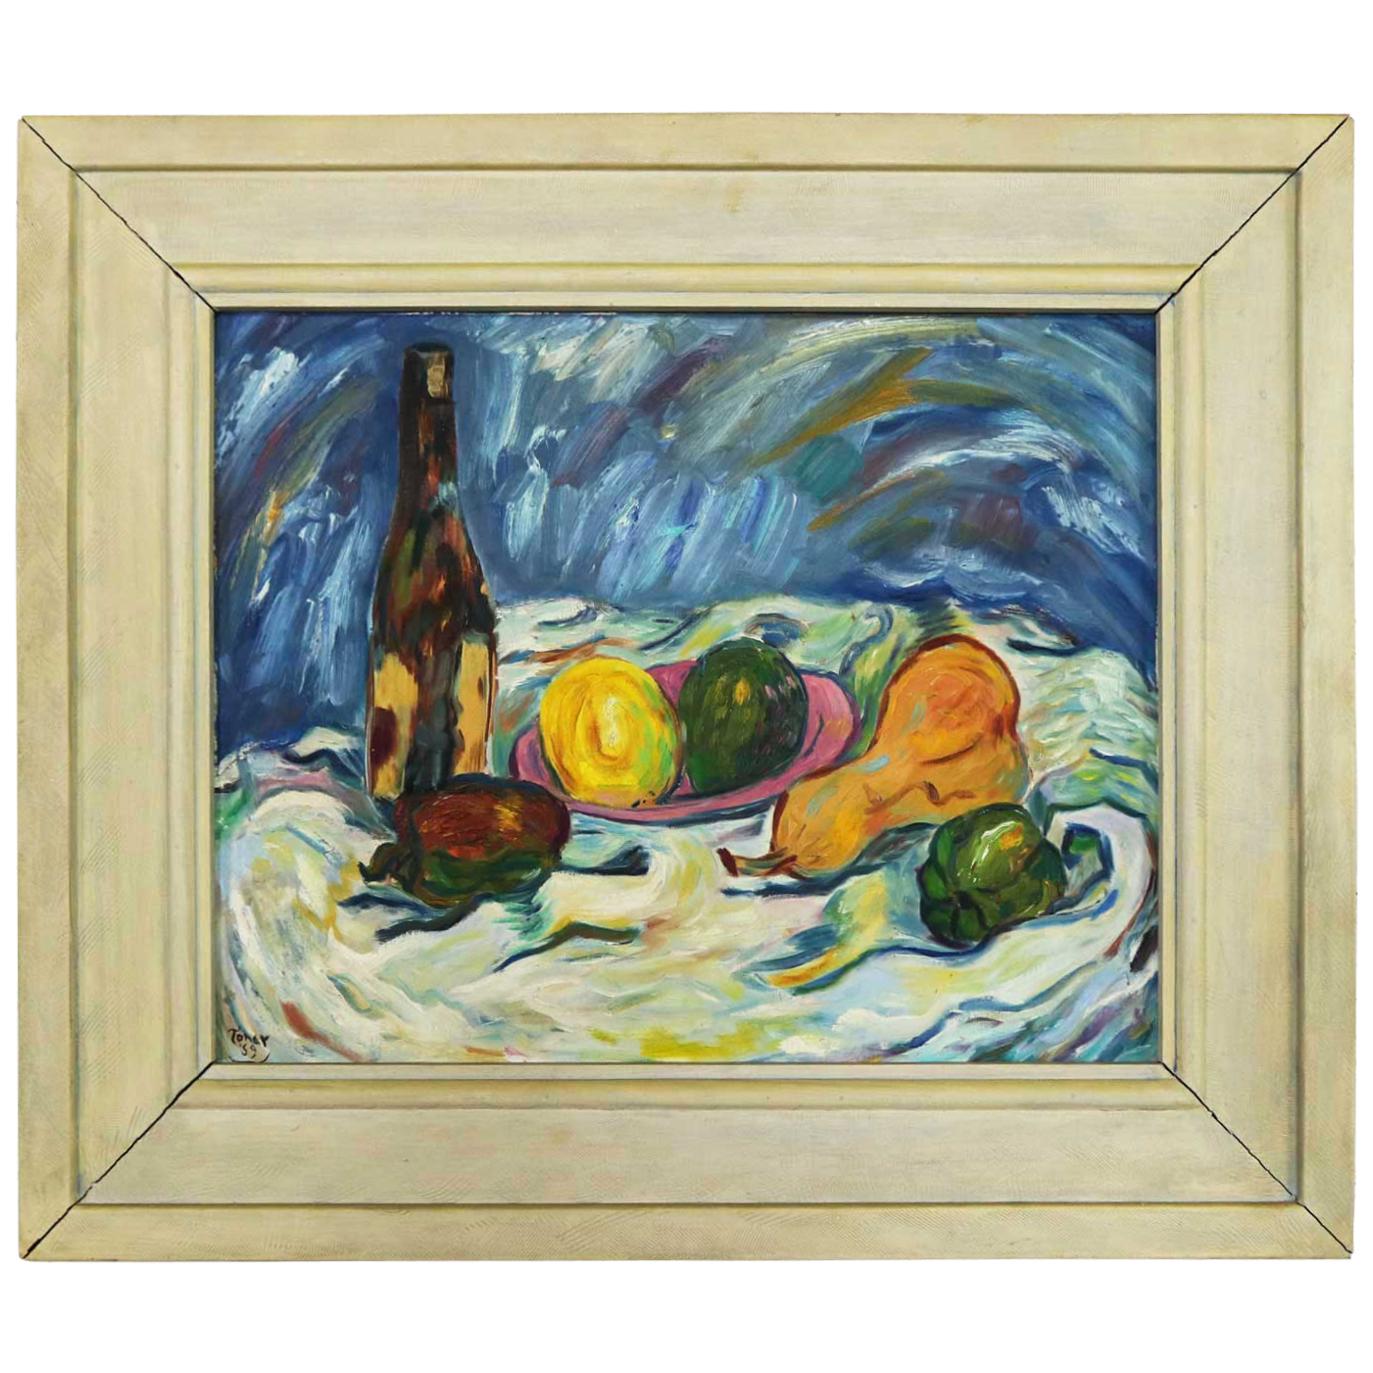 Midcentury Still Life with Fruit and Wine Bottle by Lee Tonar, 1959 For Sale